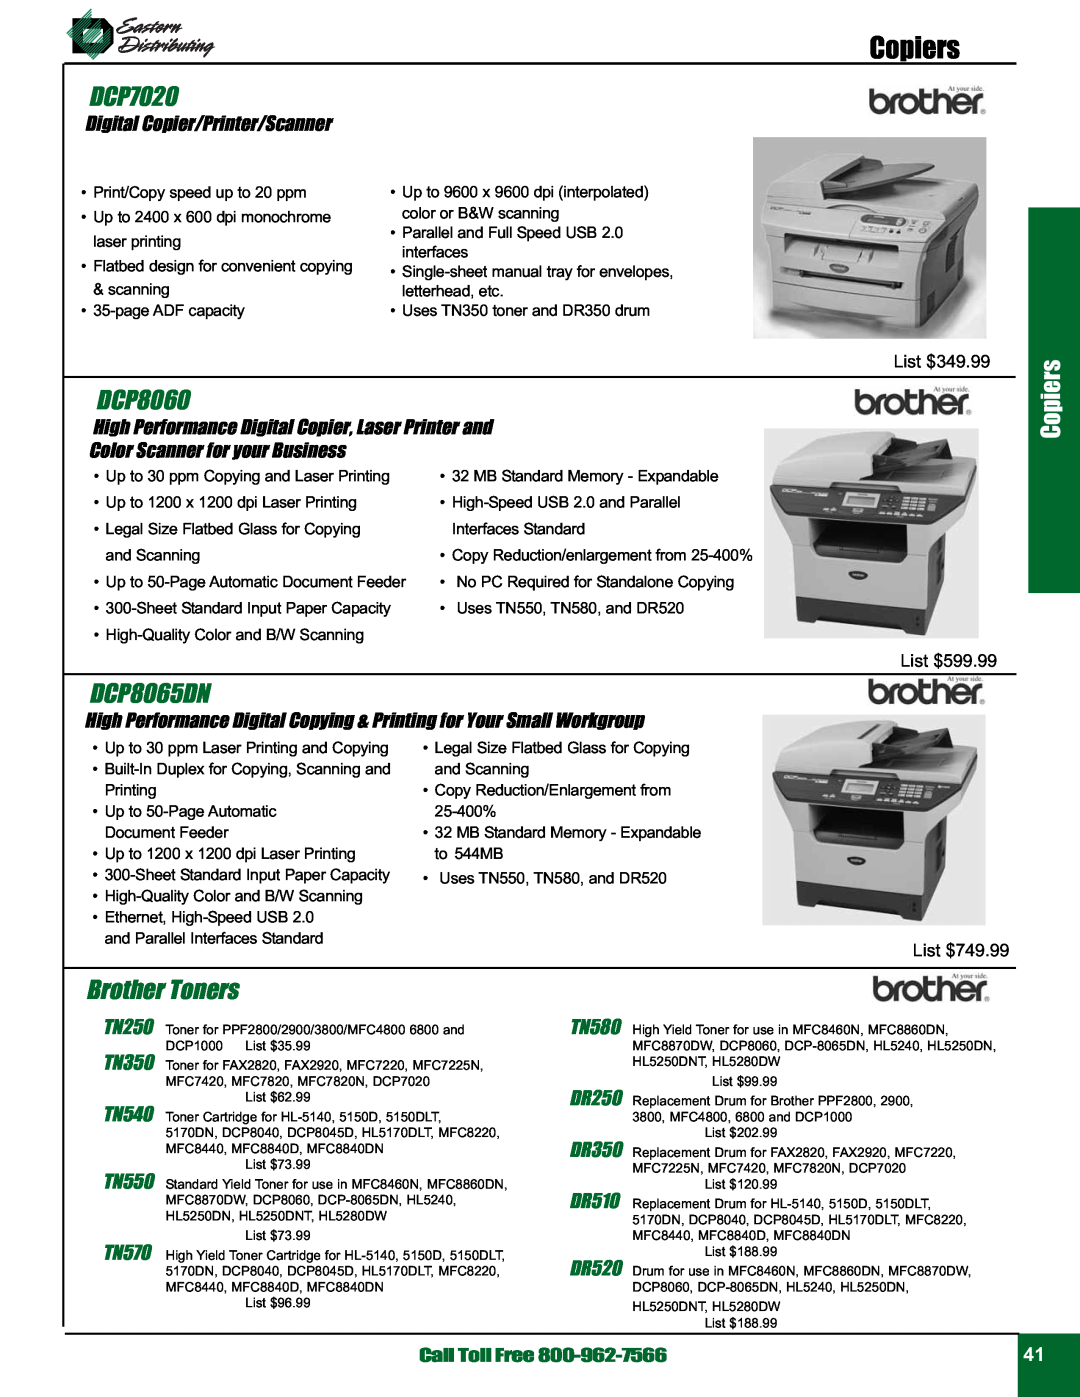 Casio EX S 880, EXV8 Copiers, DCP7020, DCP8060, DCP8065DN, Brother Toners, Digital Copier/Printer/Scanner, Call Toll Free 